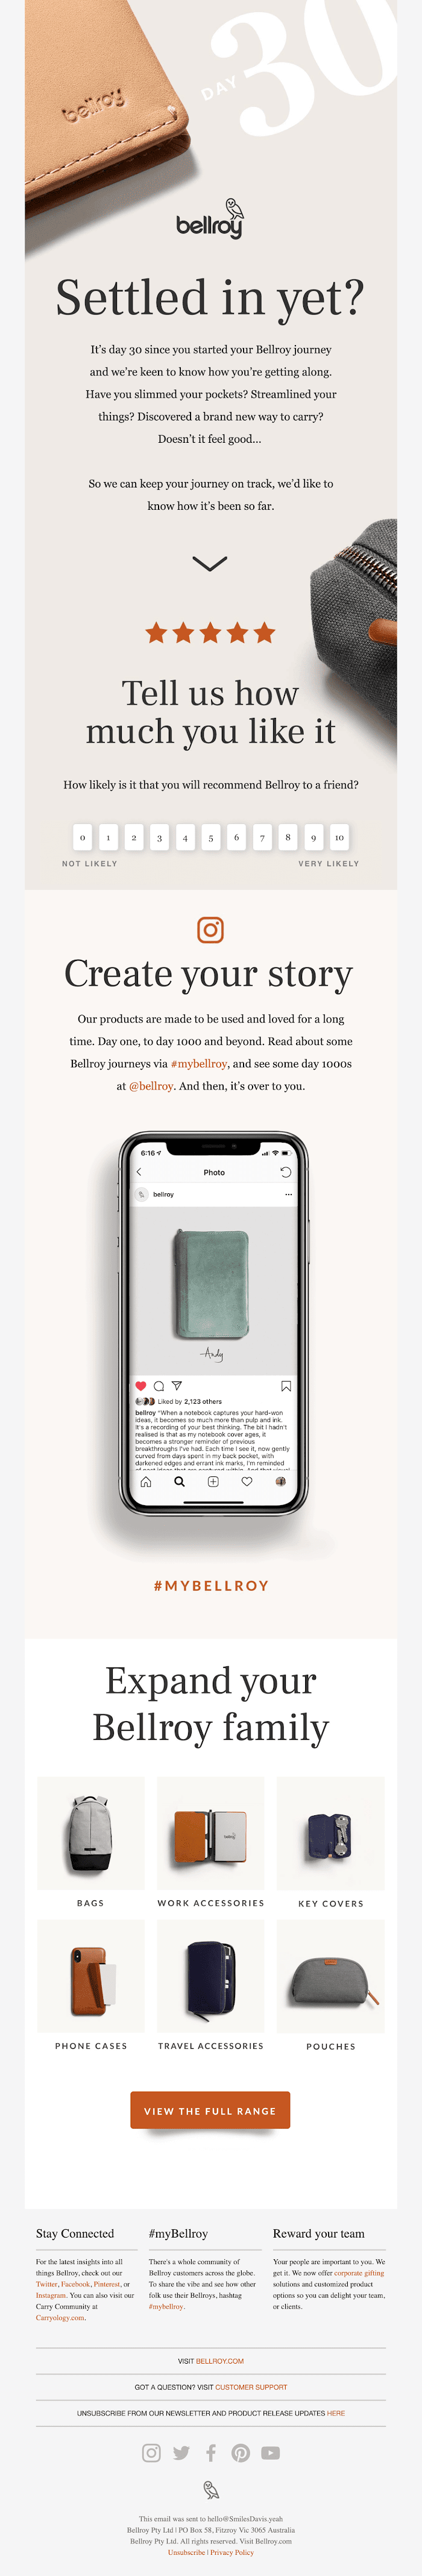 Bellroy's post purchase follow up email.